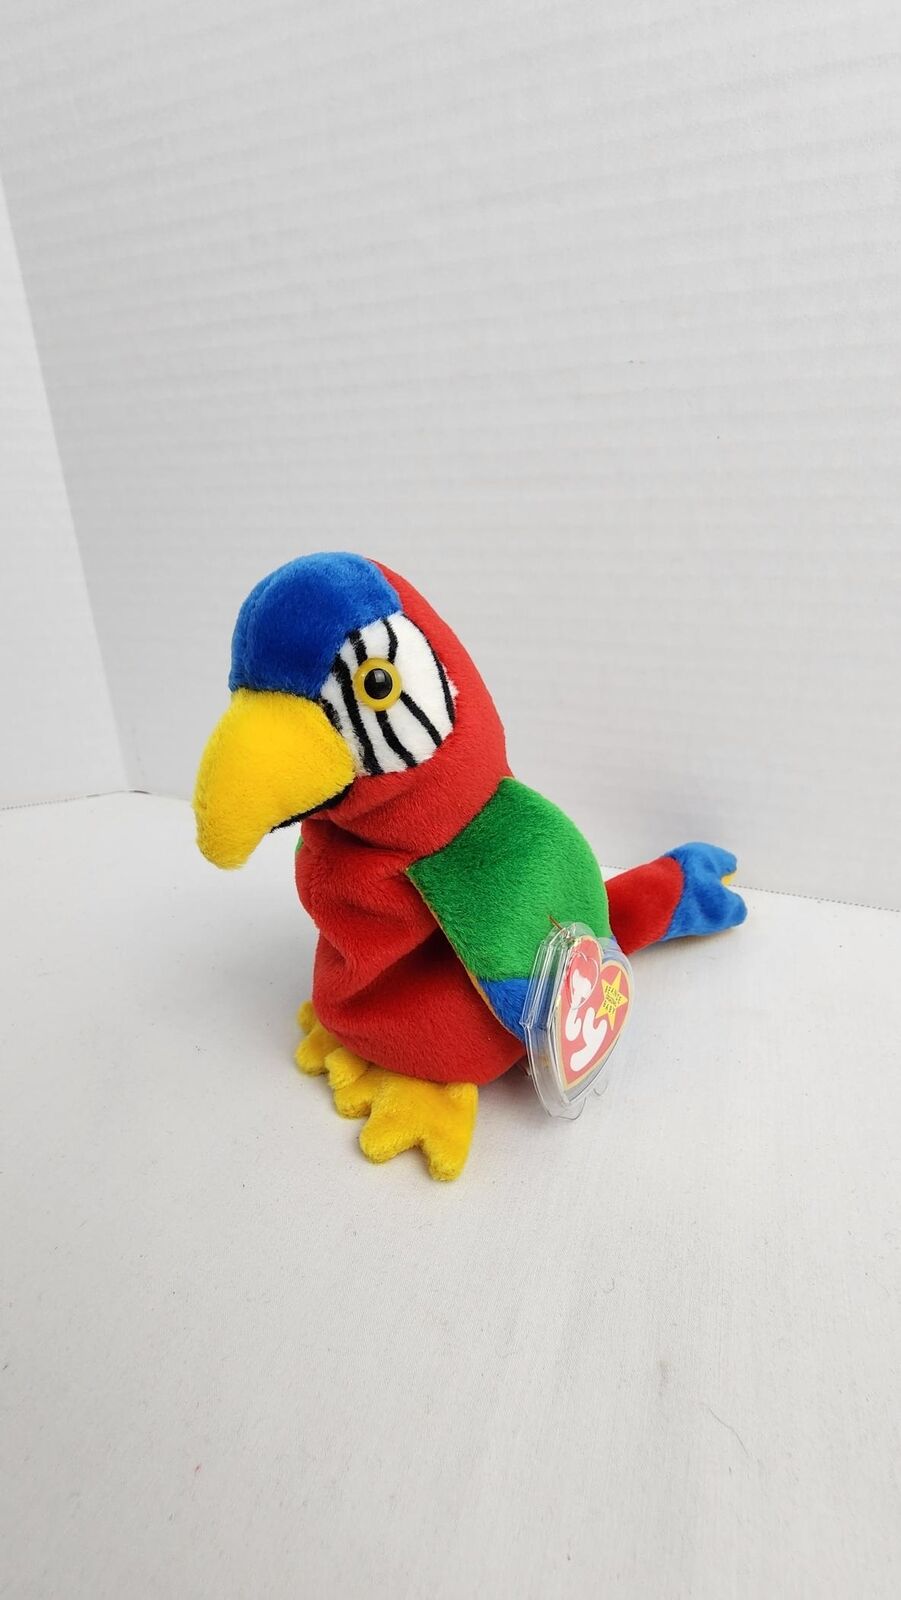 Ty Jabber Parrot Beanie Babies w/ Tag Errors - 6 in, Vintage, 1998, Multicolor